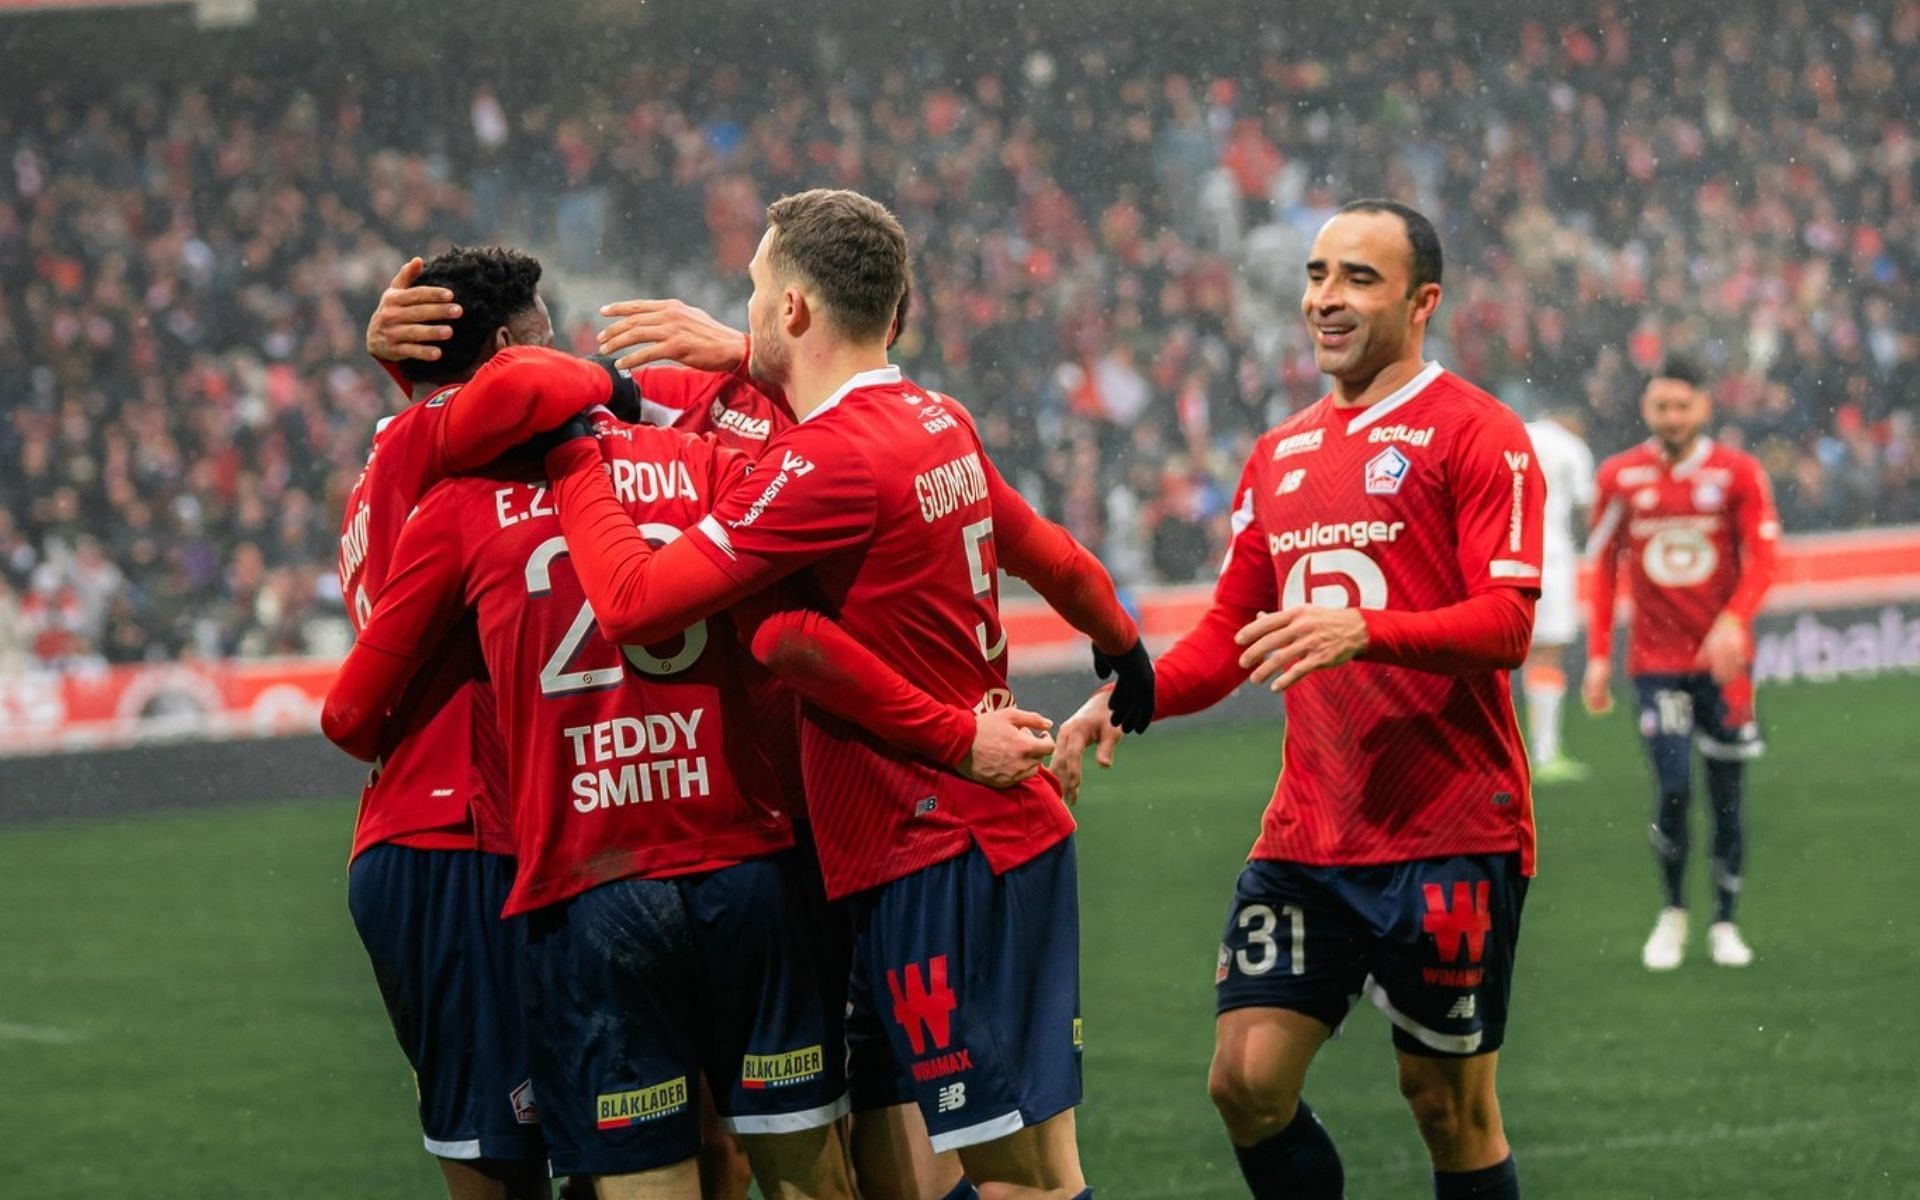 Can Lille pick up another Ligue 1 win this weekend?